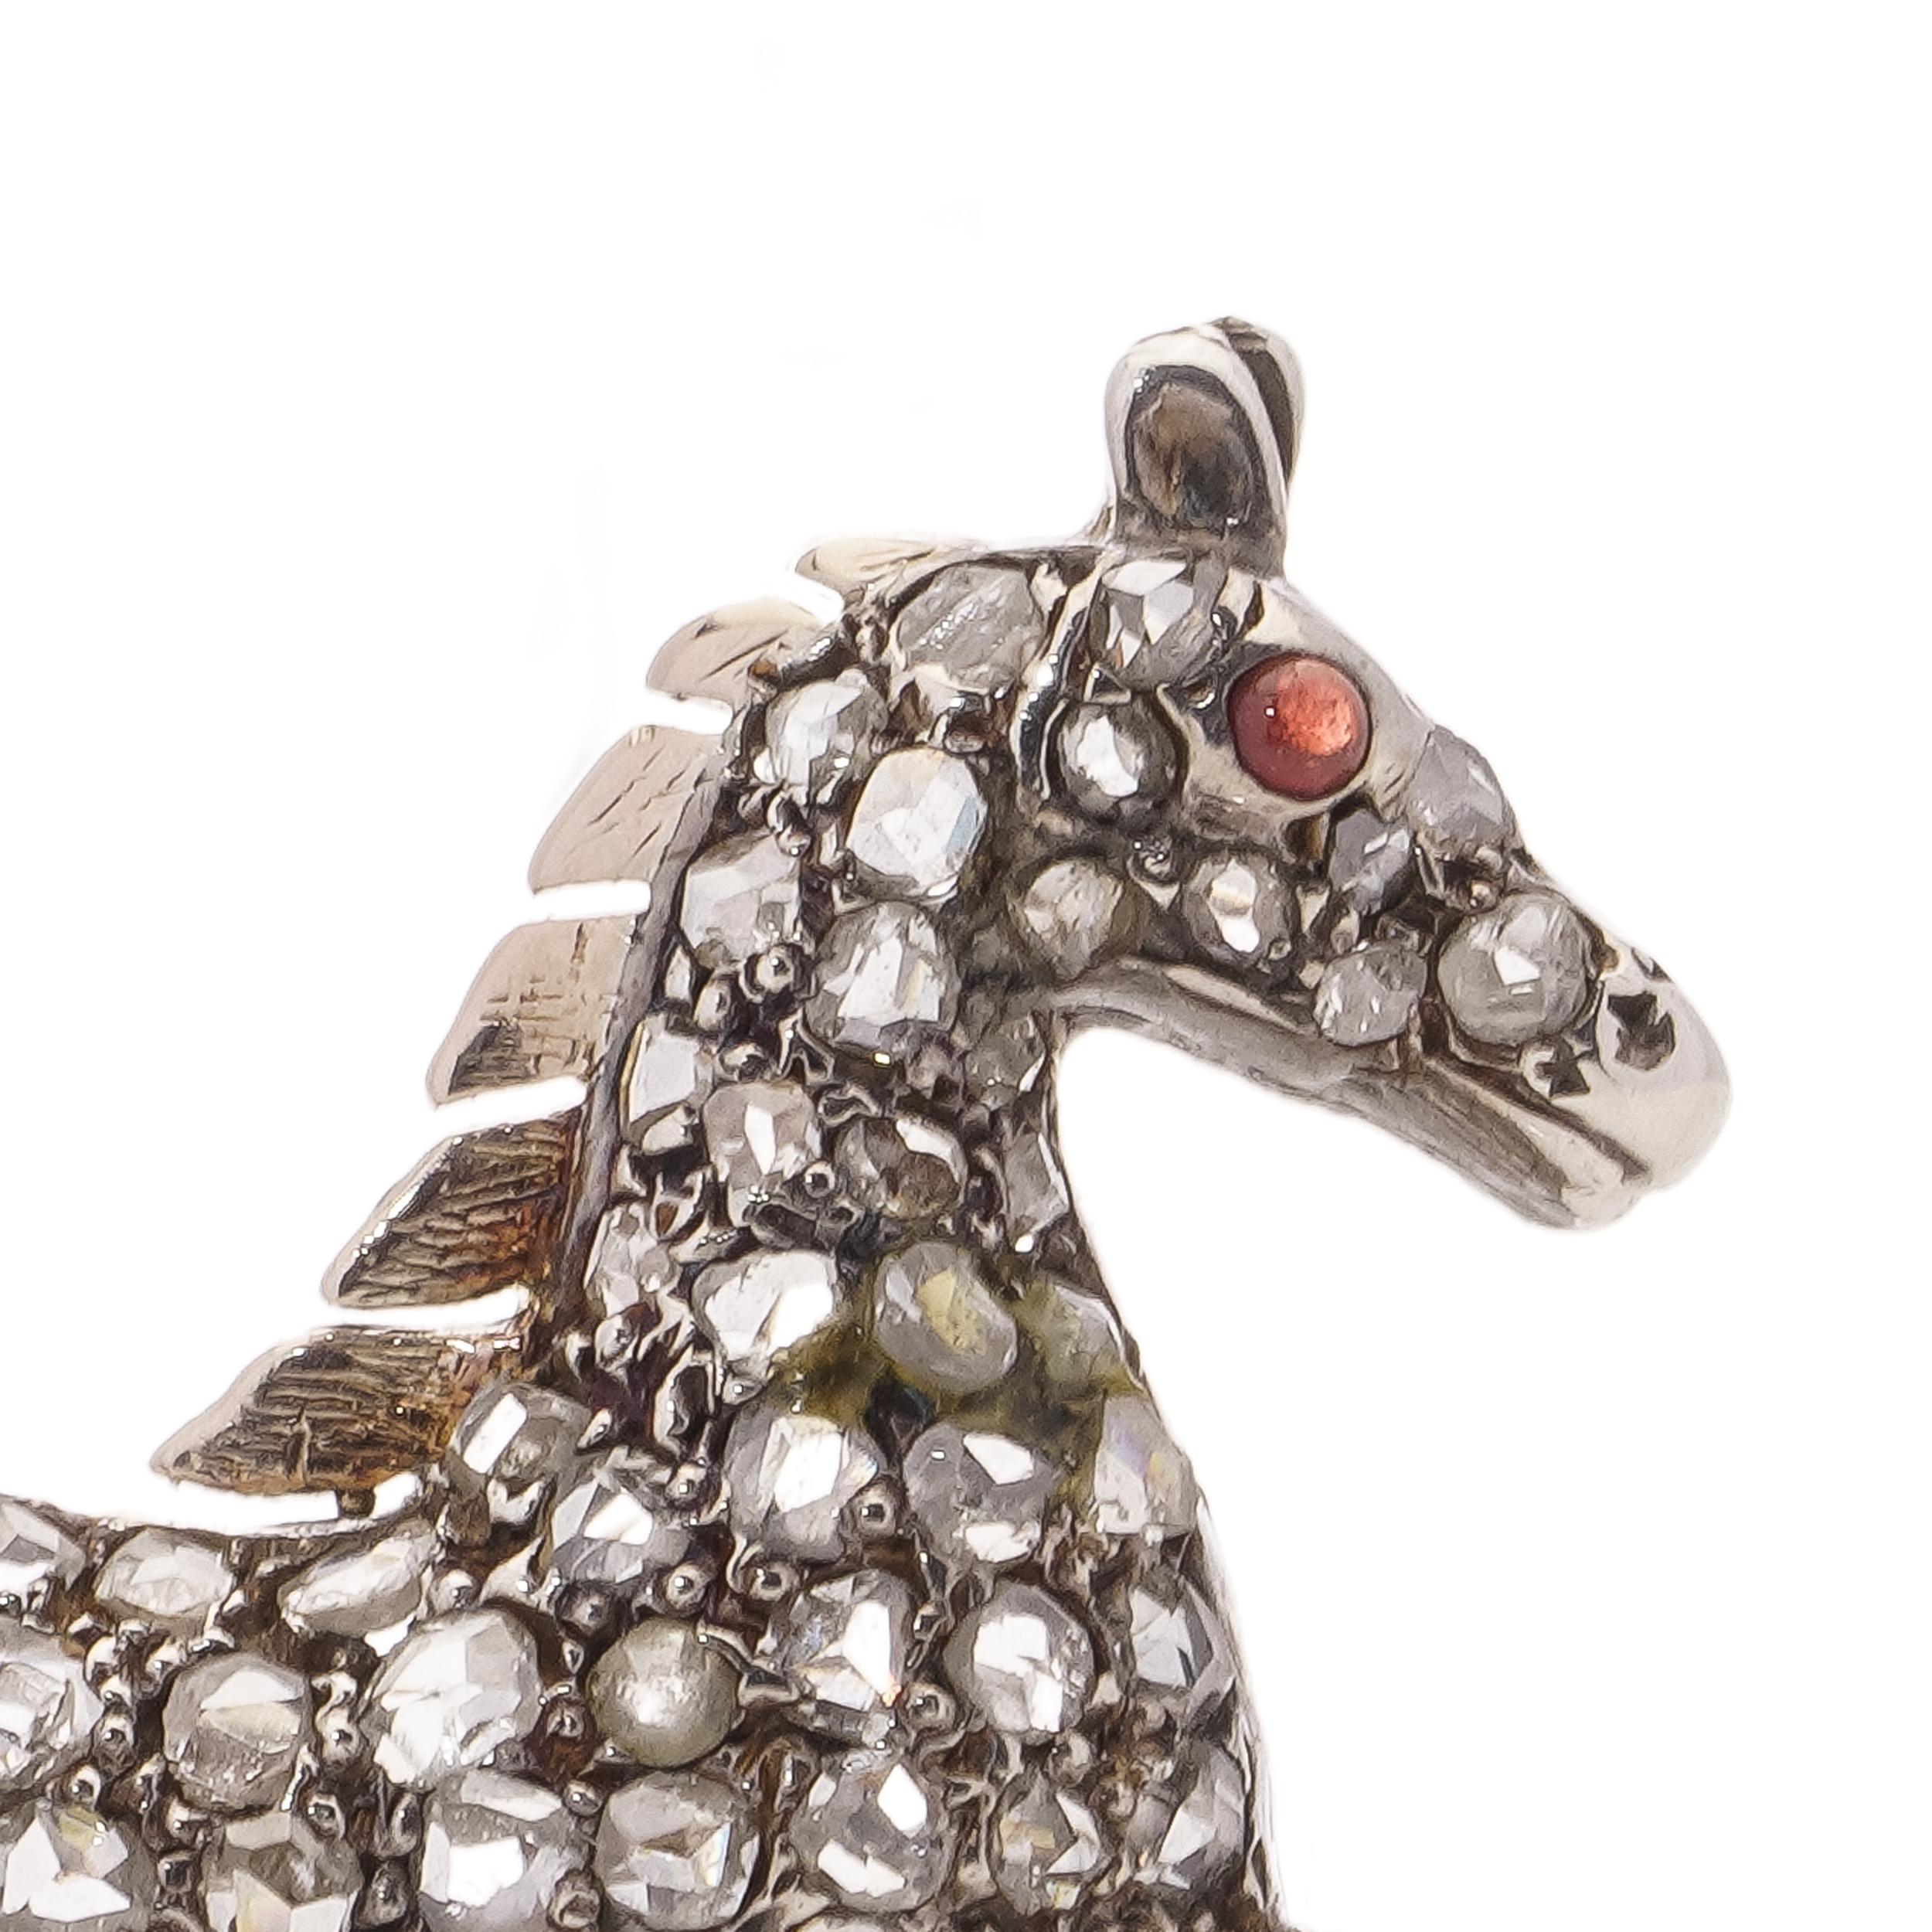 Victorian silver and 9kt gold plated back, horse brooch with rose cut diamonds and cabochon ruby.
Made in England, Circa 1860's.
X - ray been tested positive for 9kt. gold and silver. 

The dimensions -
Size: 3.7 x 2.5 x 0.6 cm
Weight: 5.1